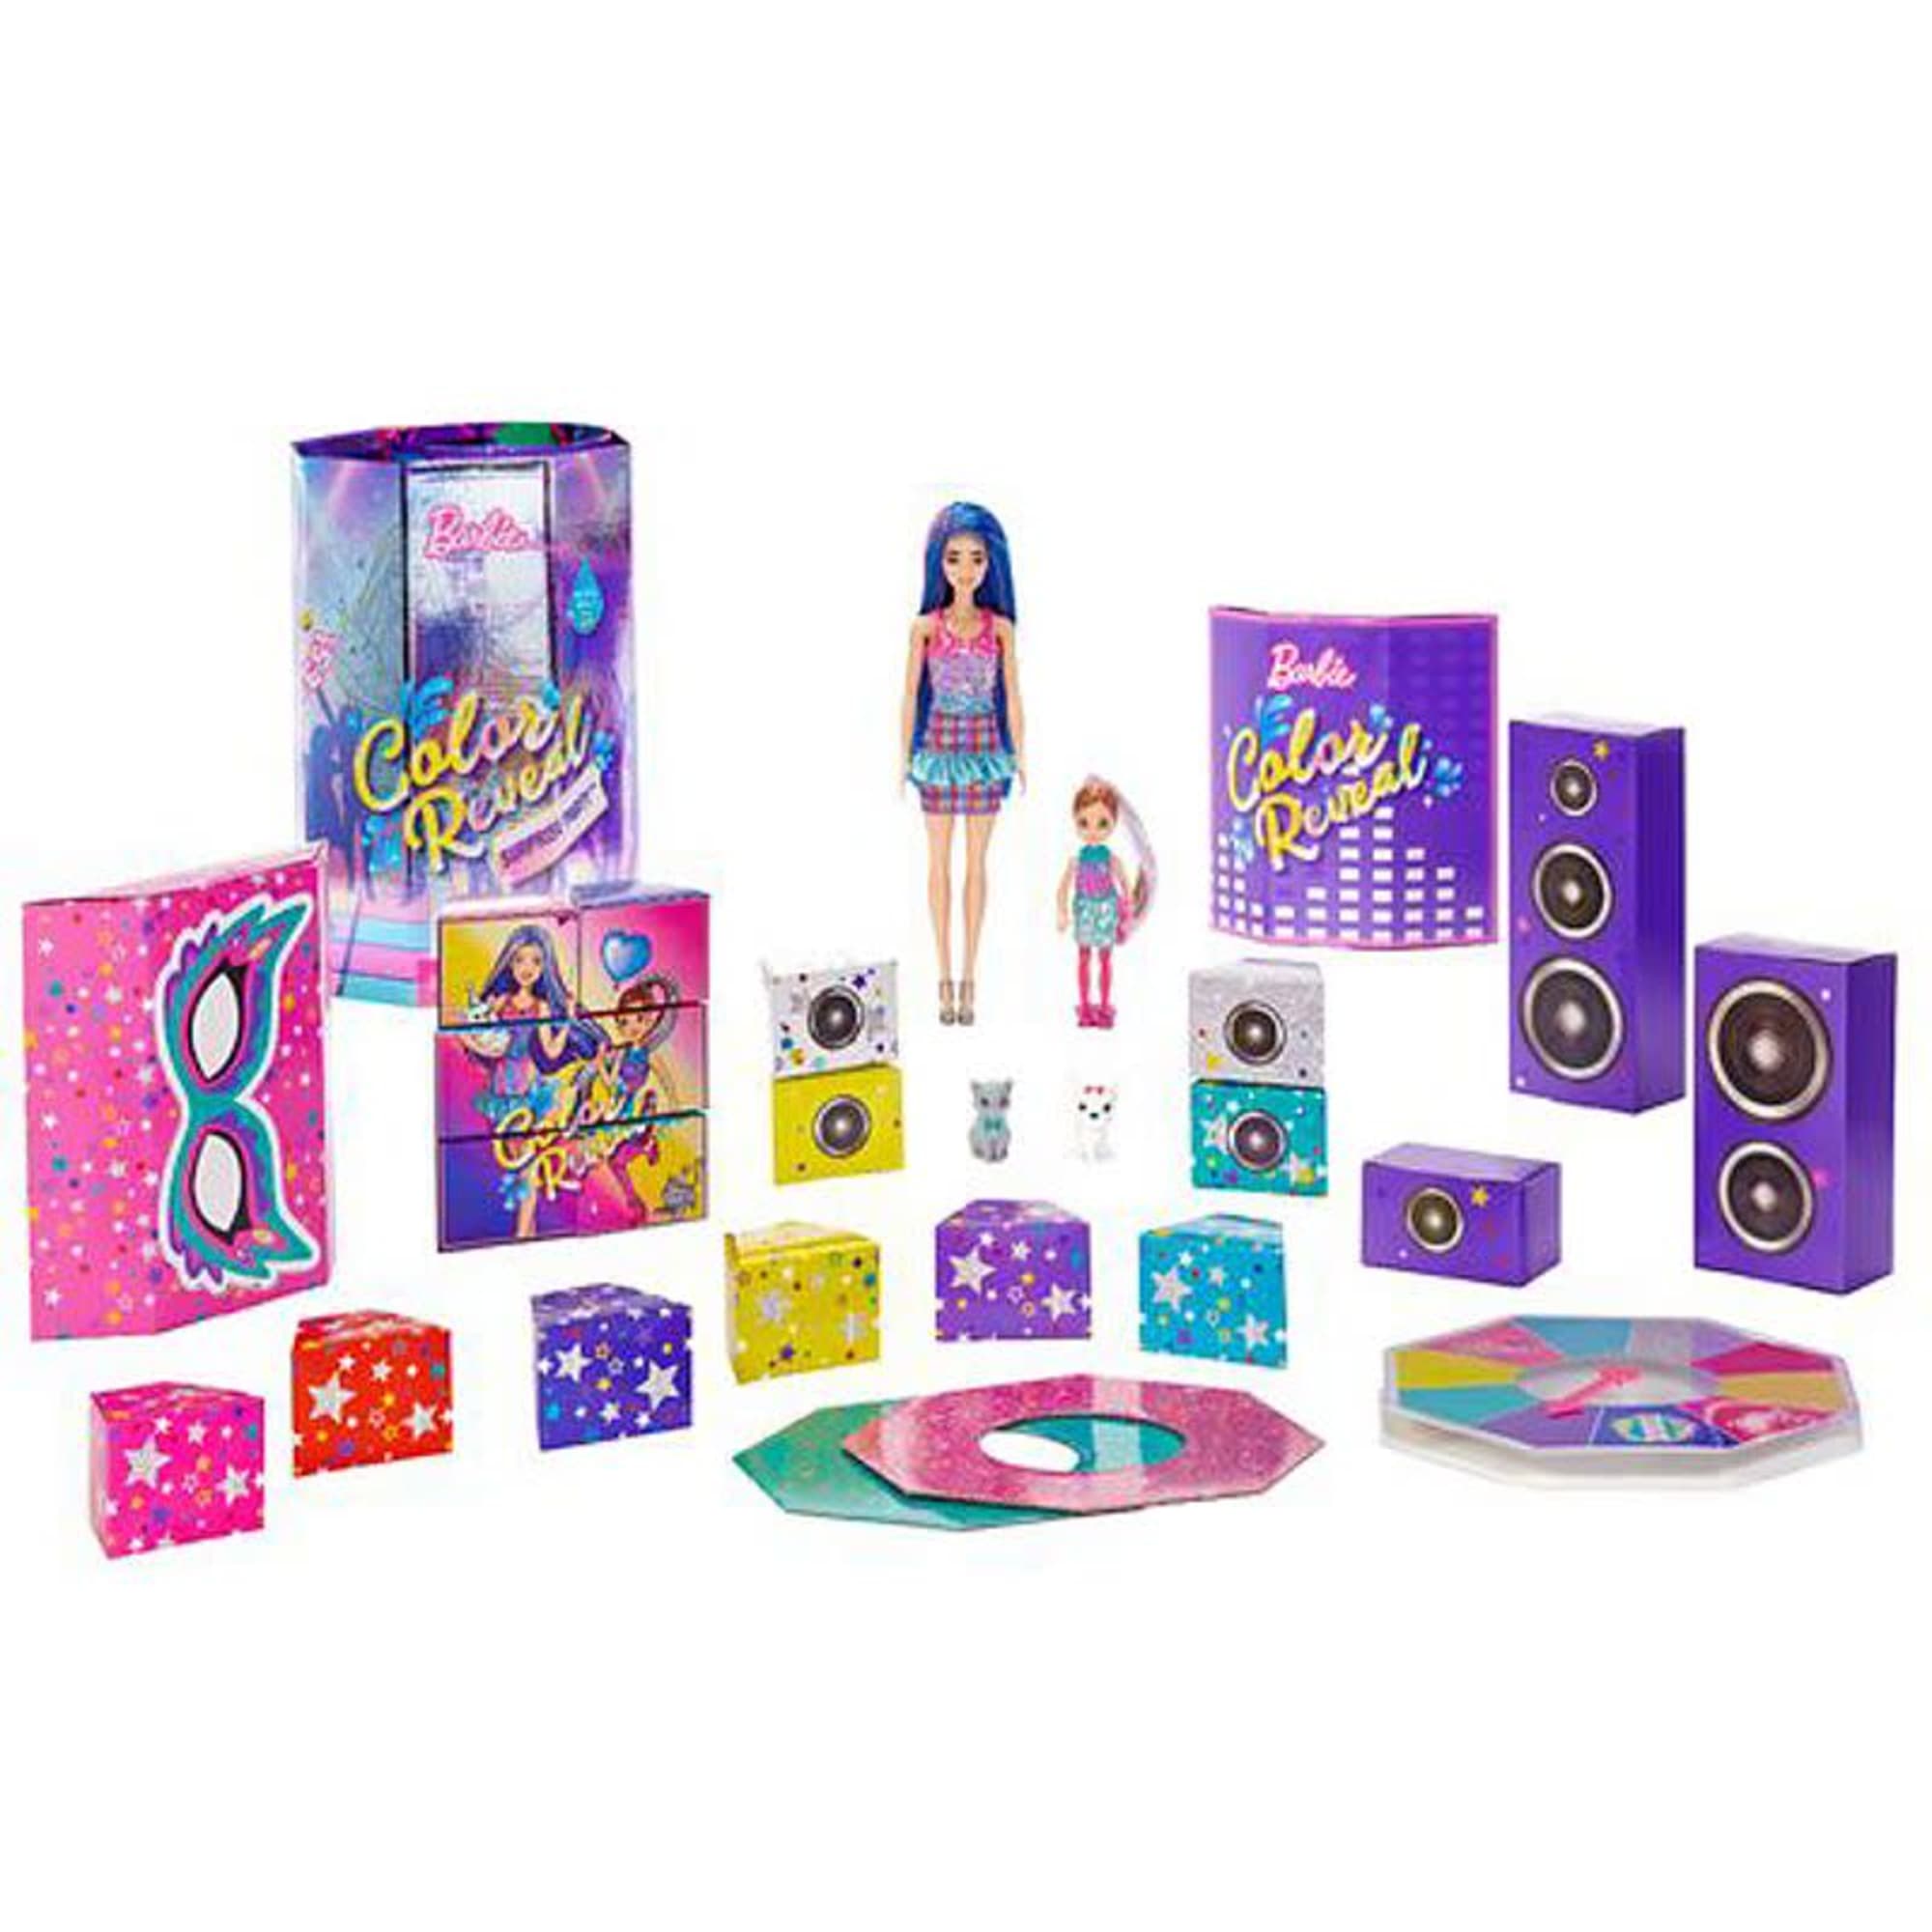 Barbie Pop Reveal Rise and Surprise Giftset with doll - HRK57 BarbiePedia